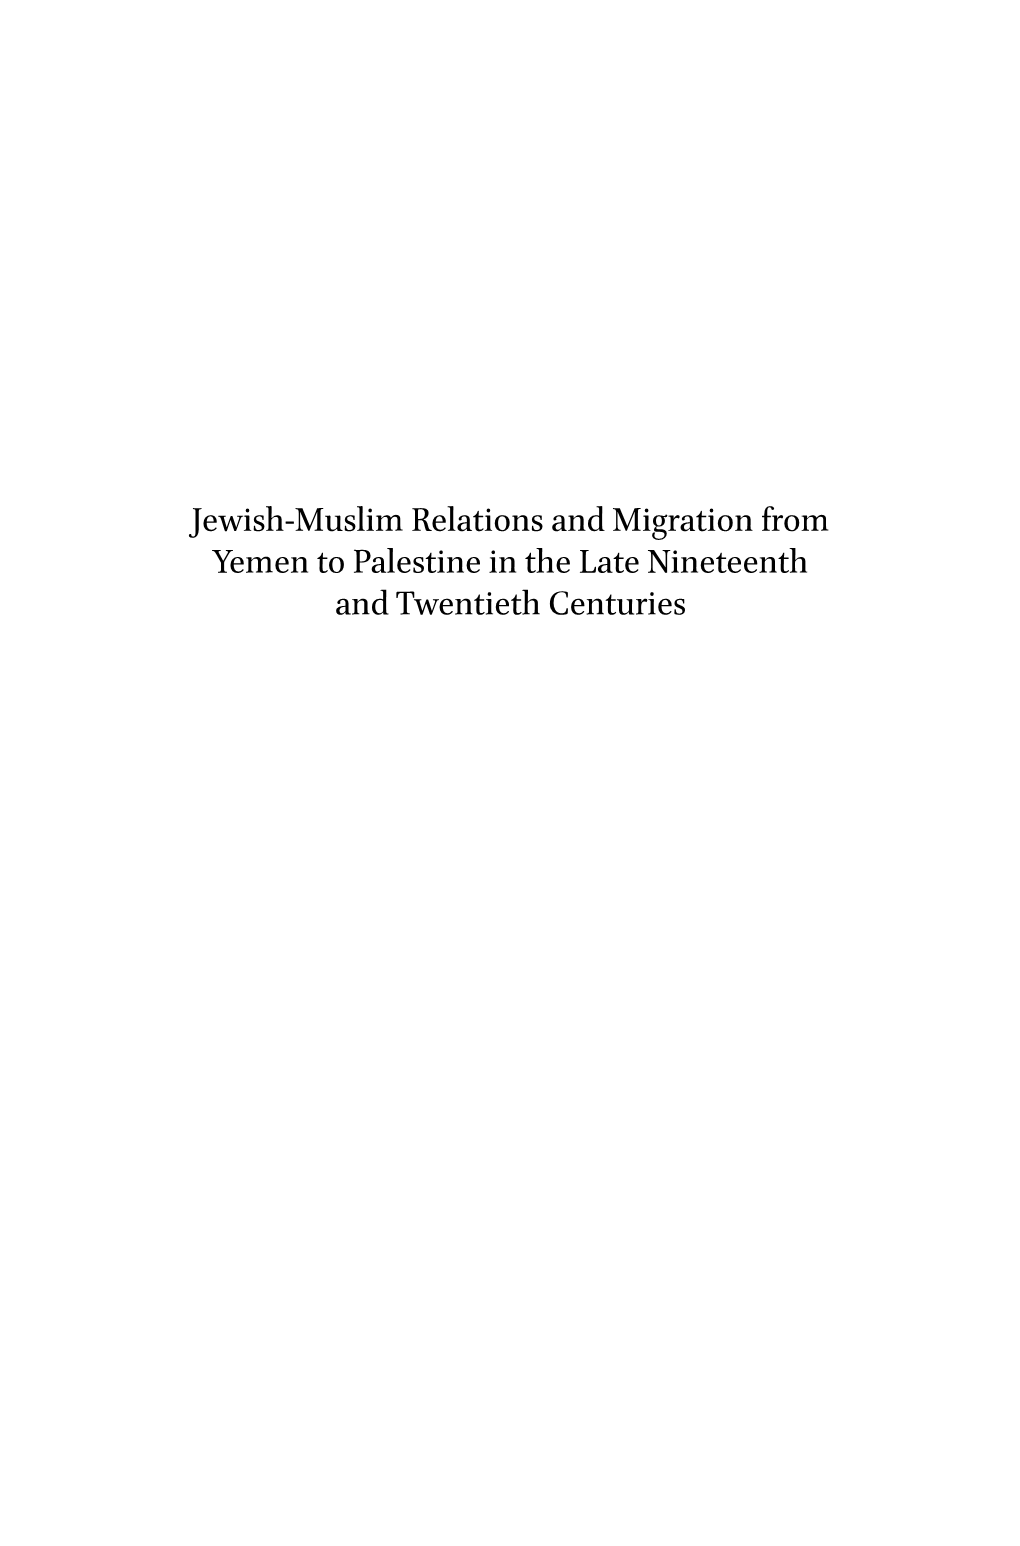 Jewish-Muslim Relations and Migration from Yemen to Palestine in the Late Nineteenth and Twentieth Centuries Brill’S Series in Jewish Studies